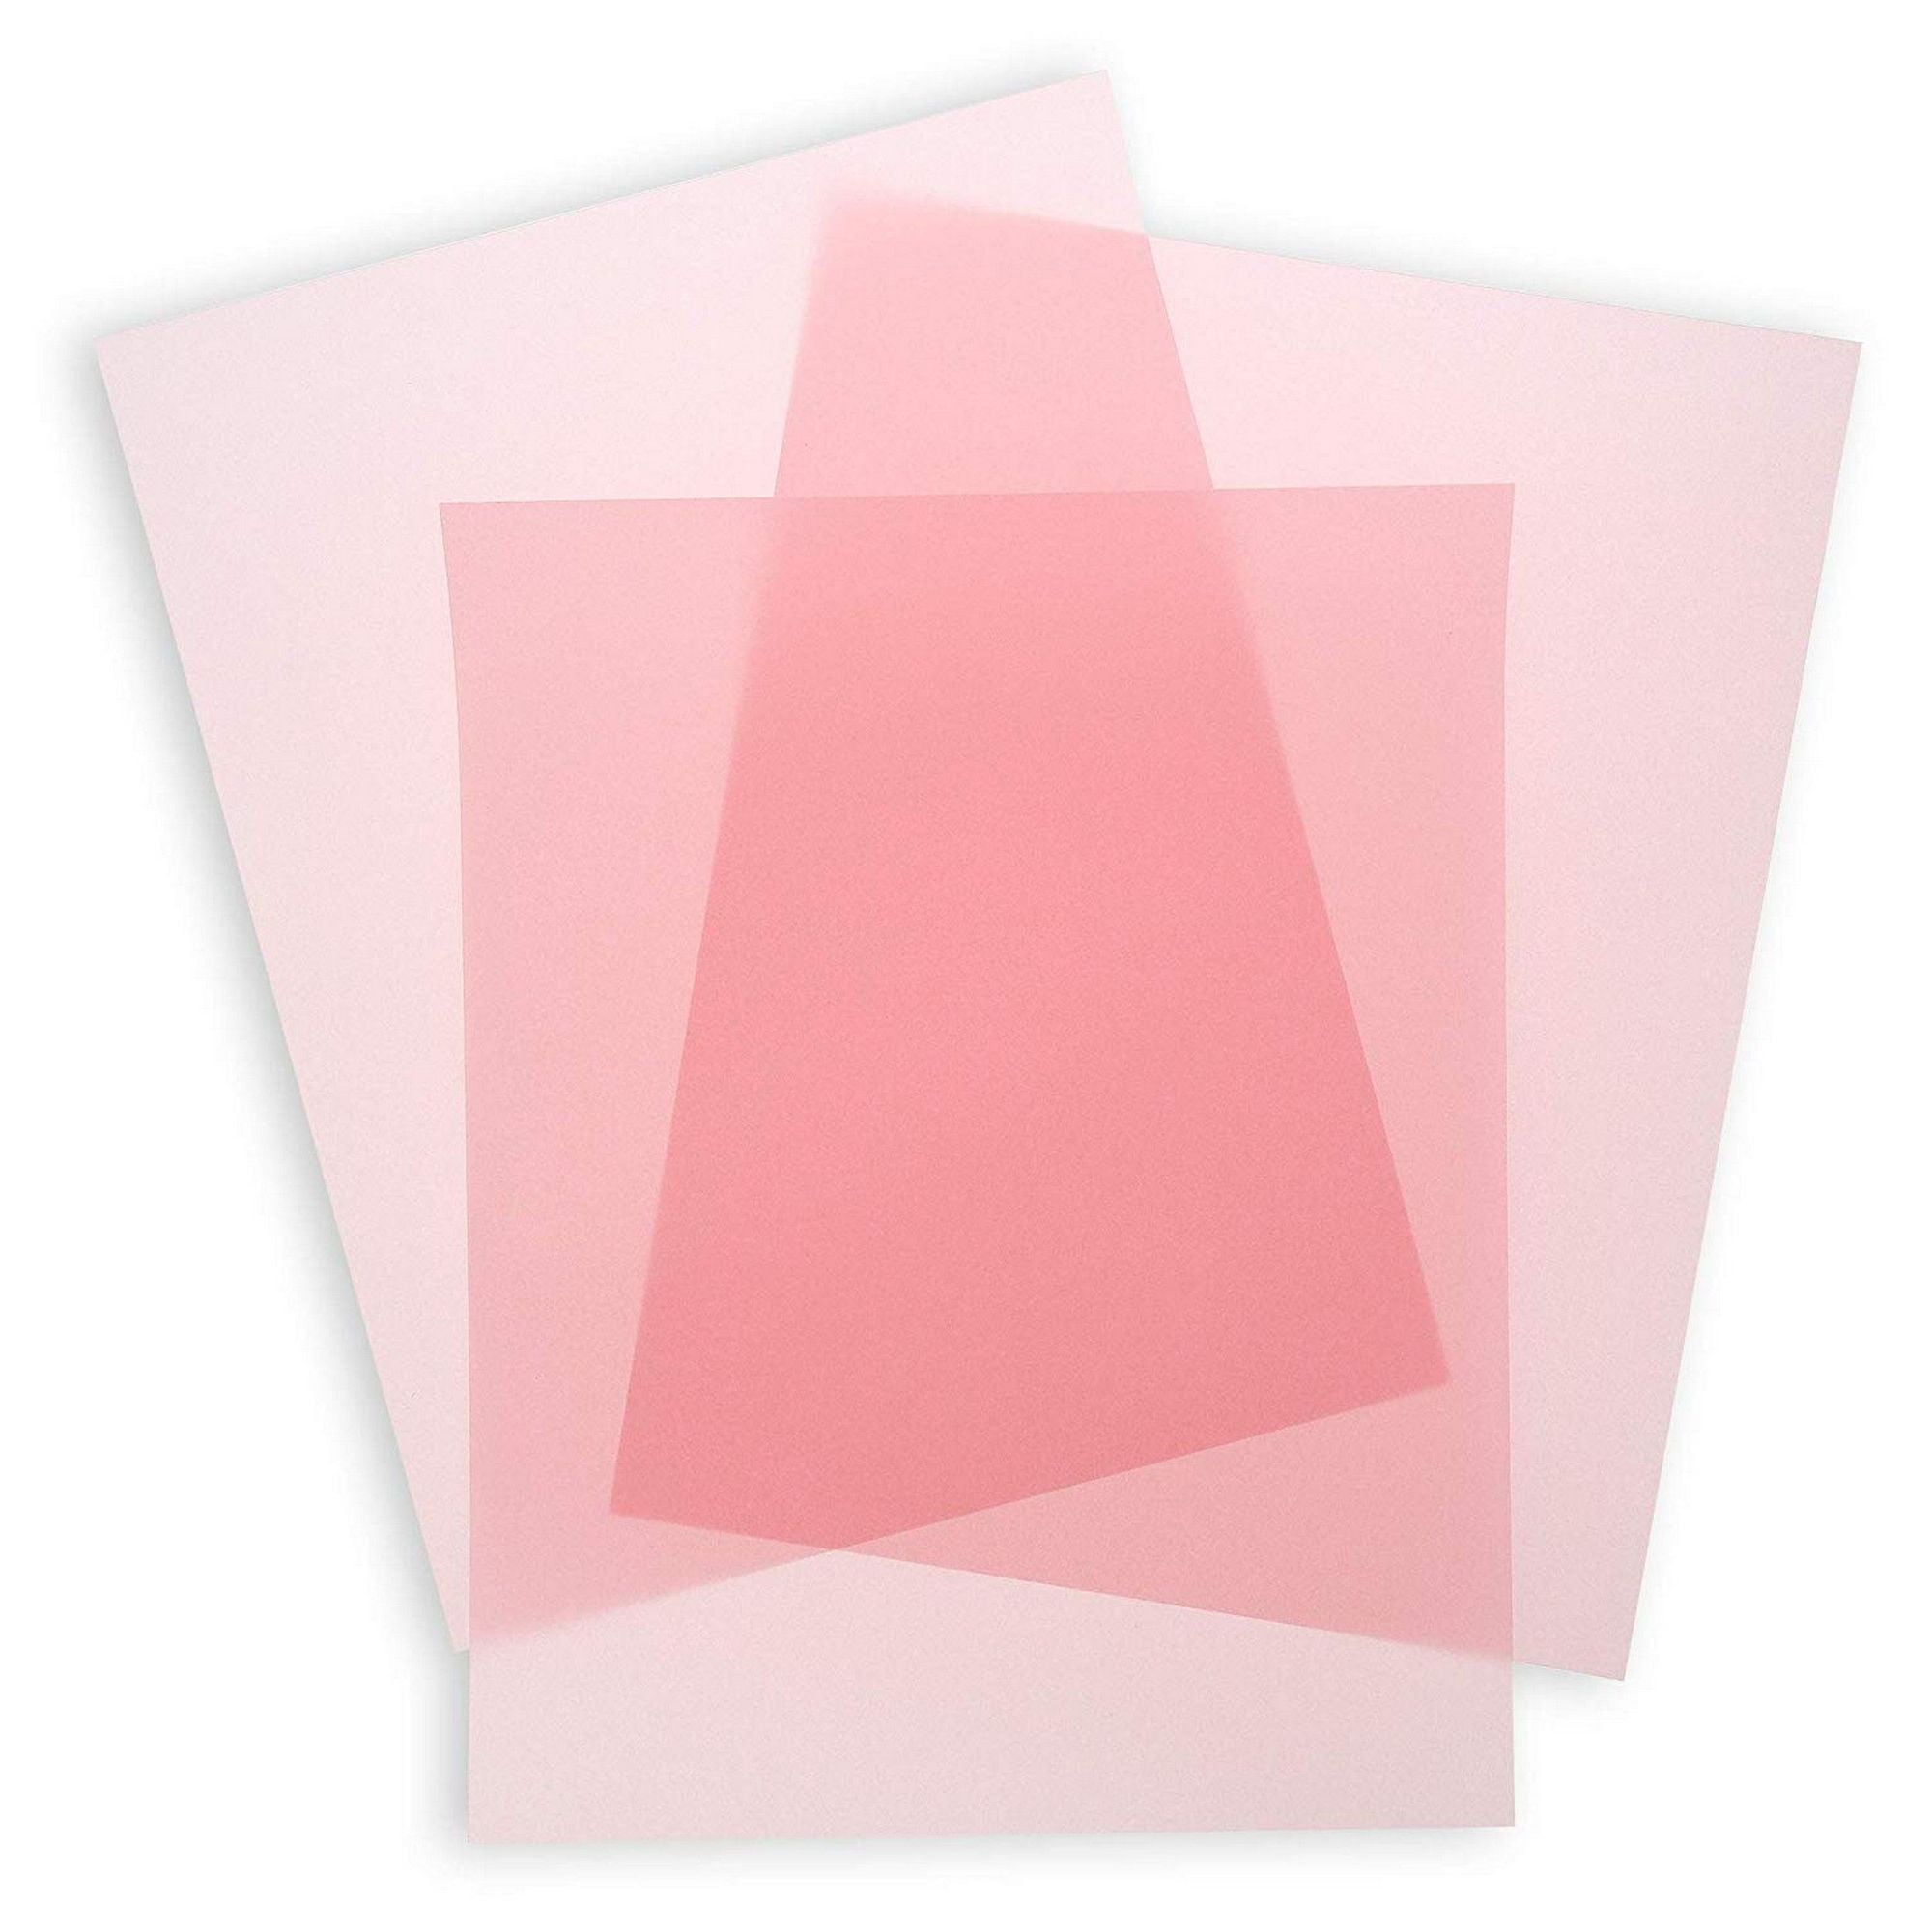 50Sheets Blush Pink Vellum Paper for Card Making, Invitations